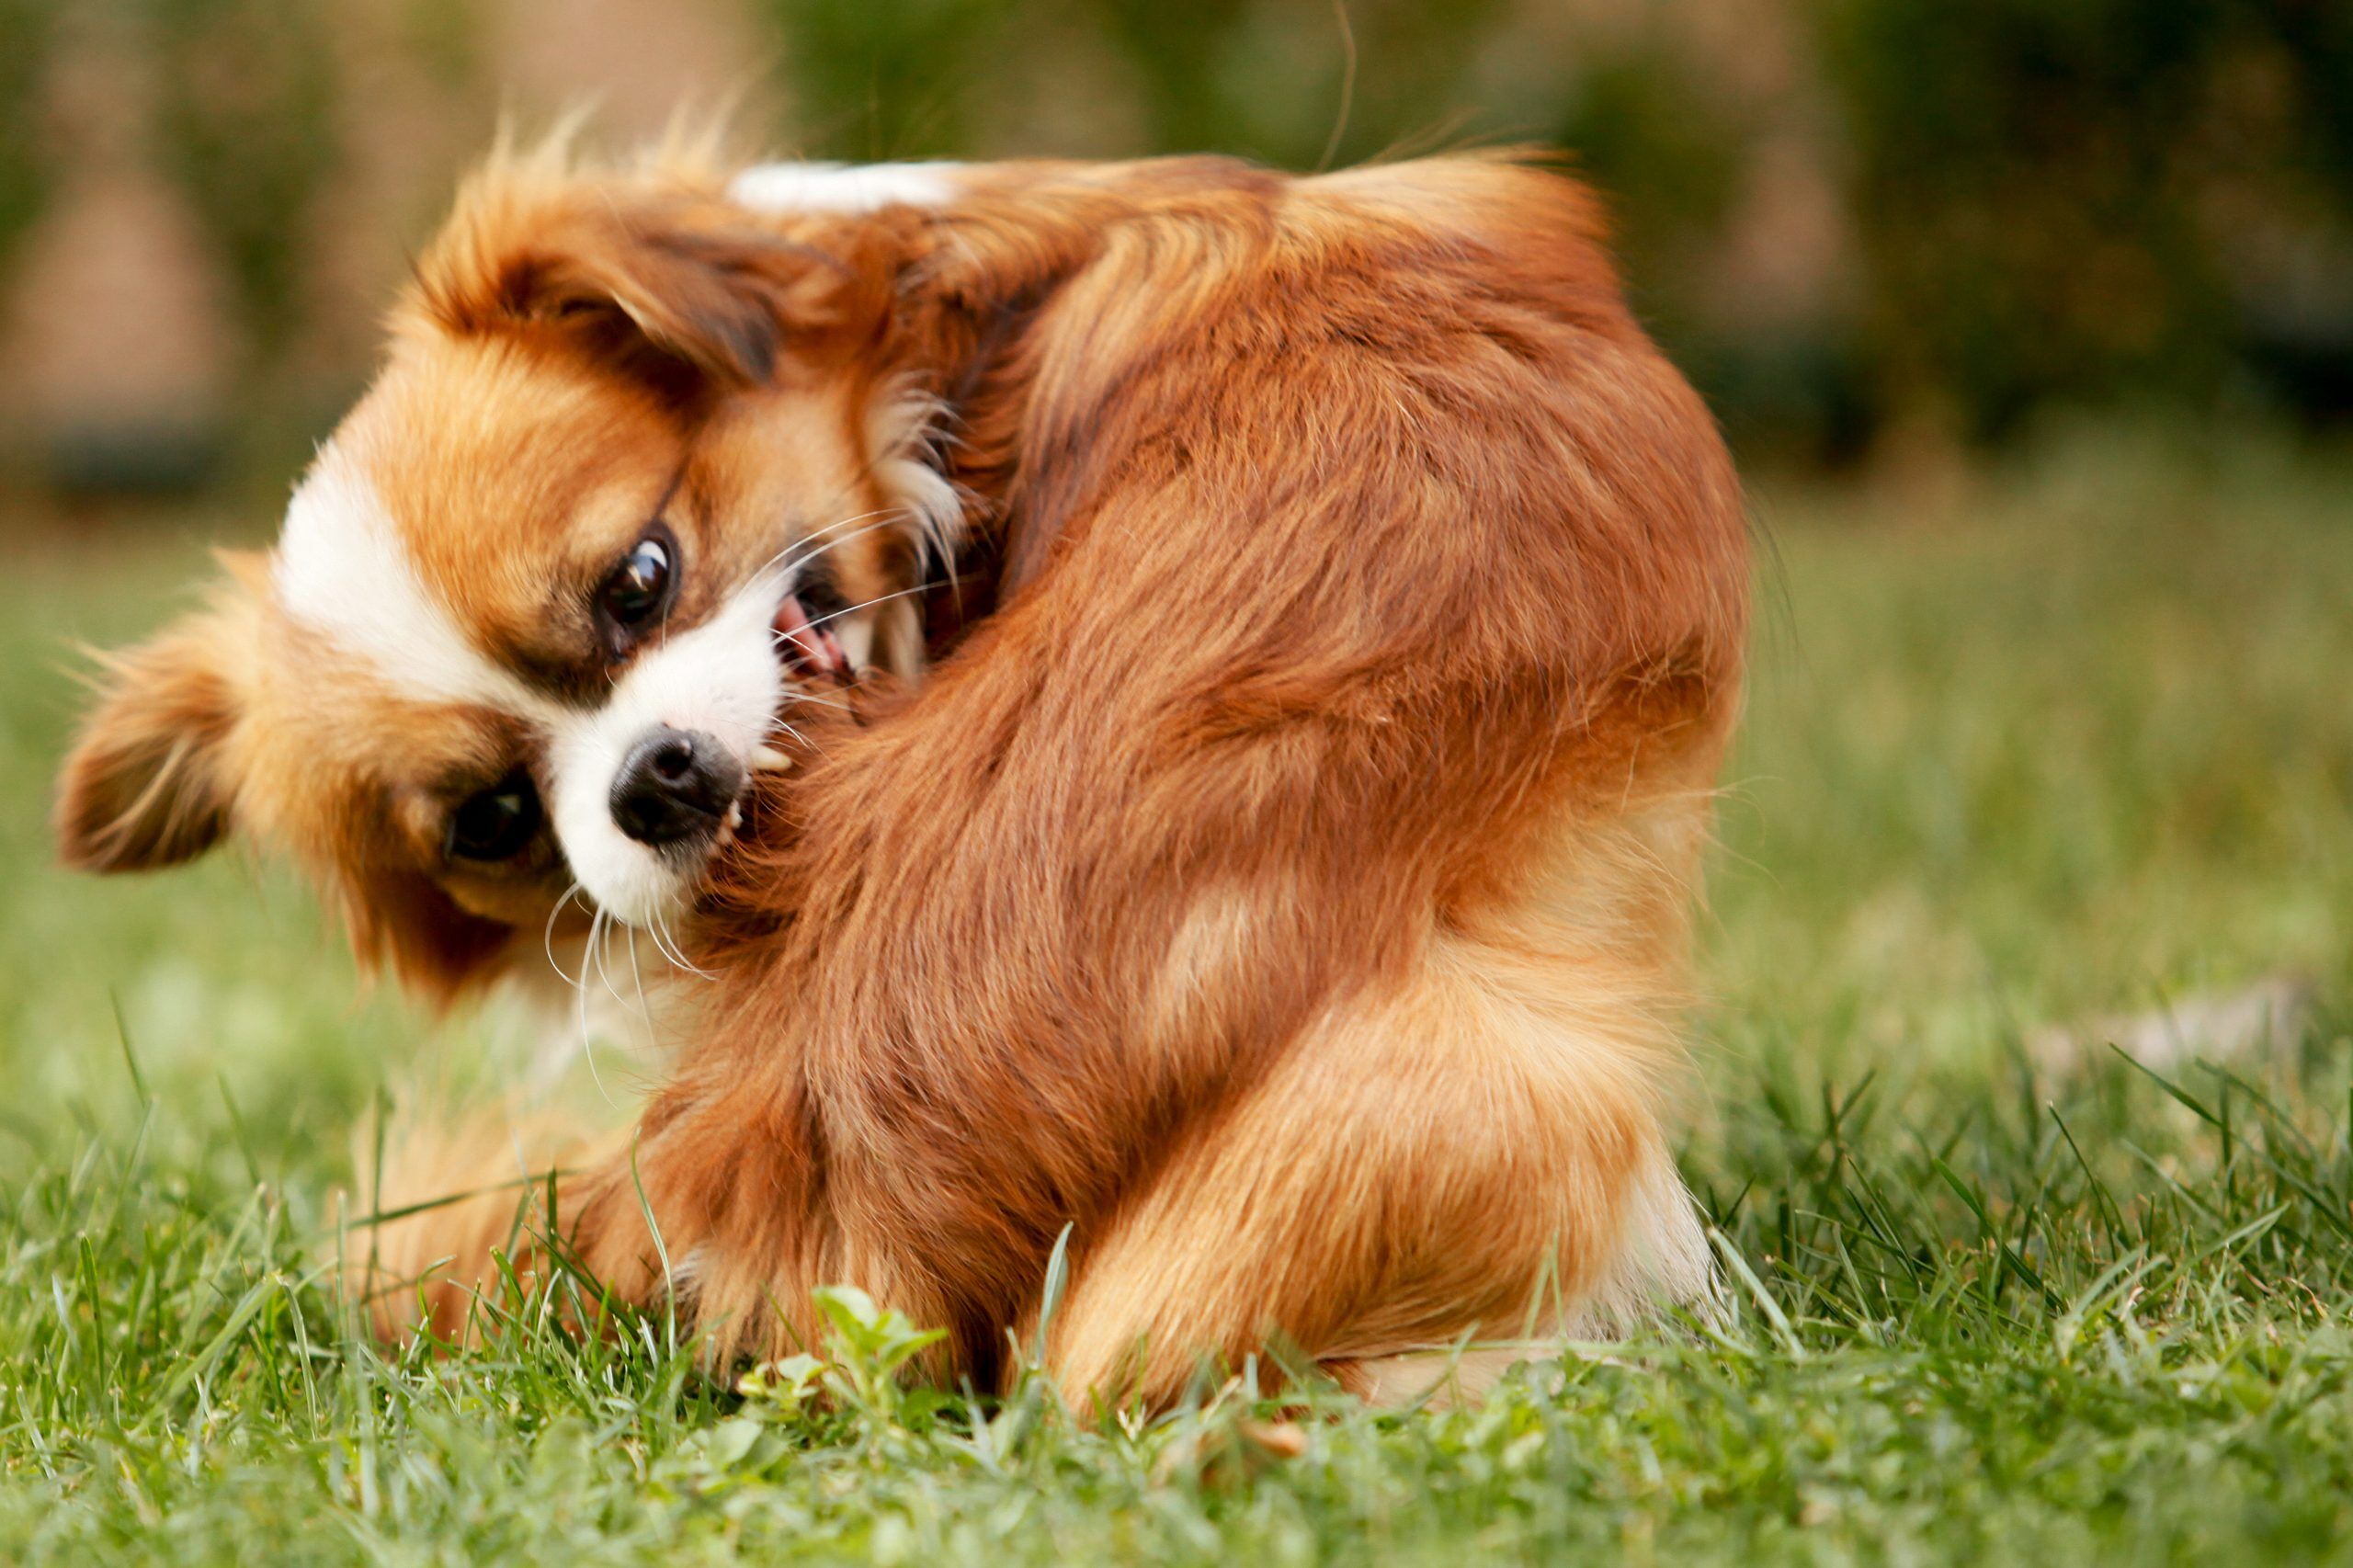 A Pekingese dog with a hot spot scratching his fur